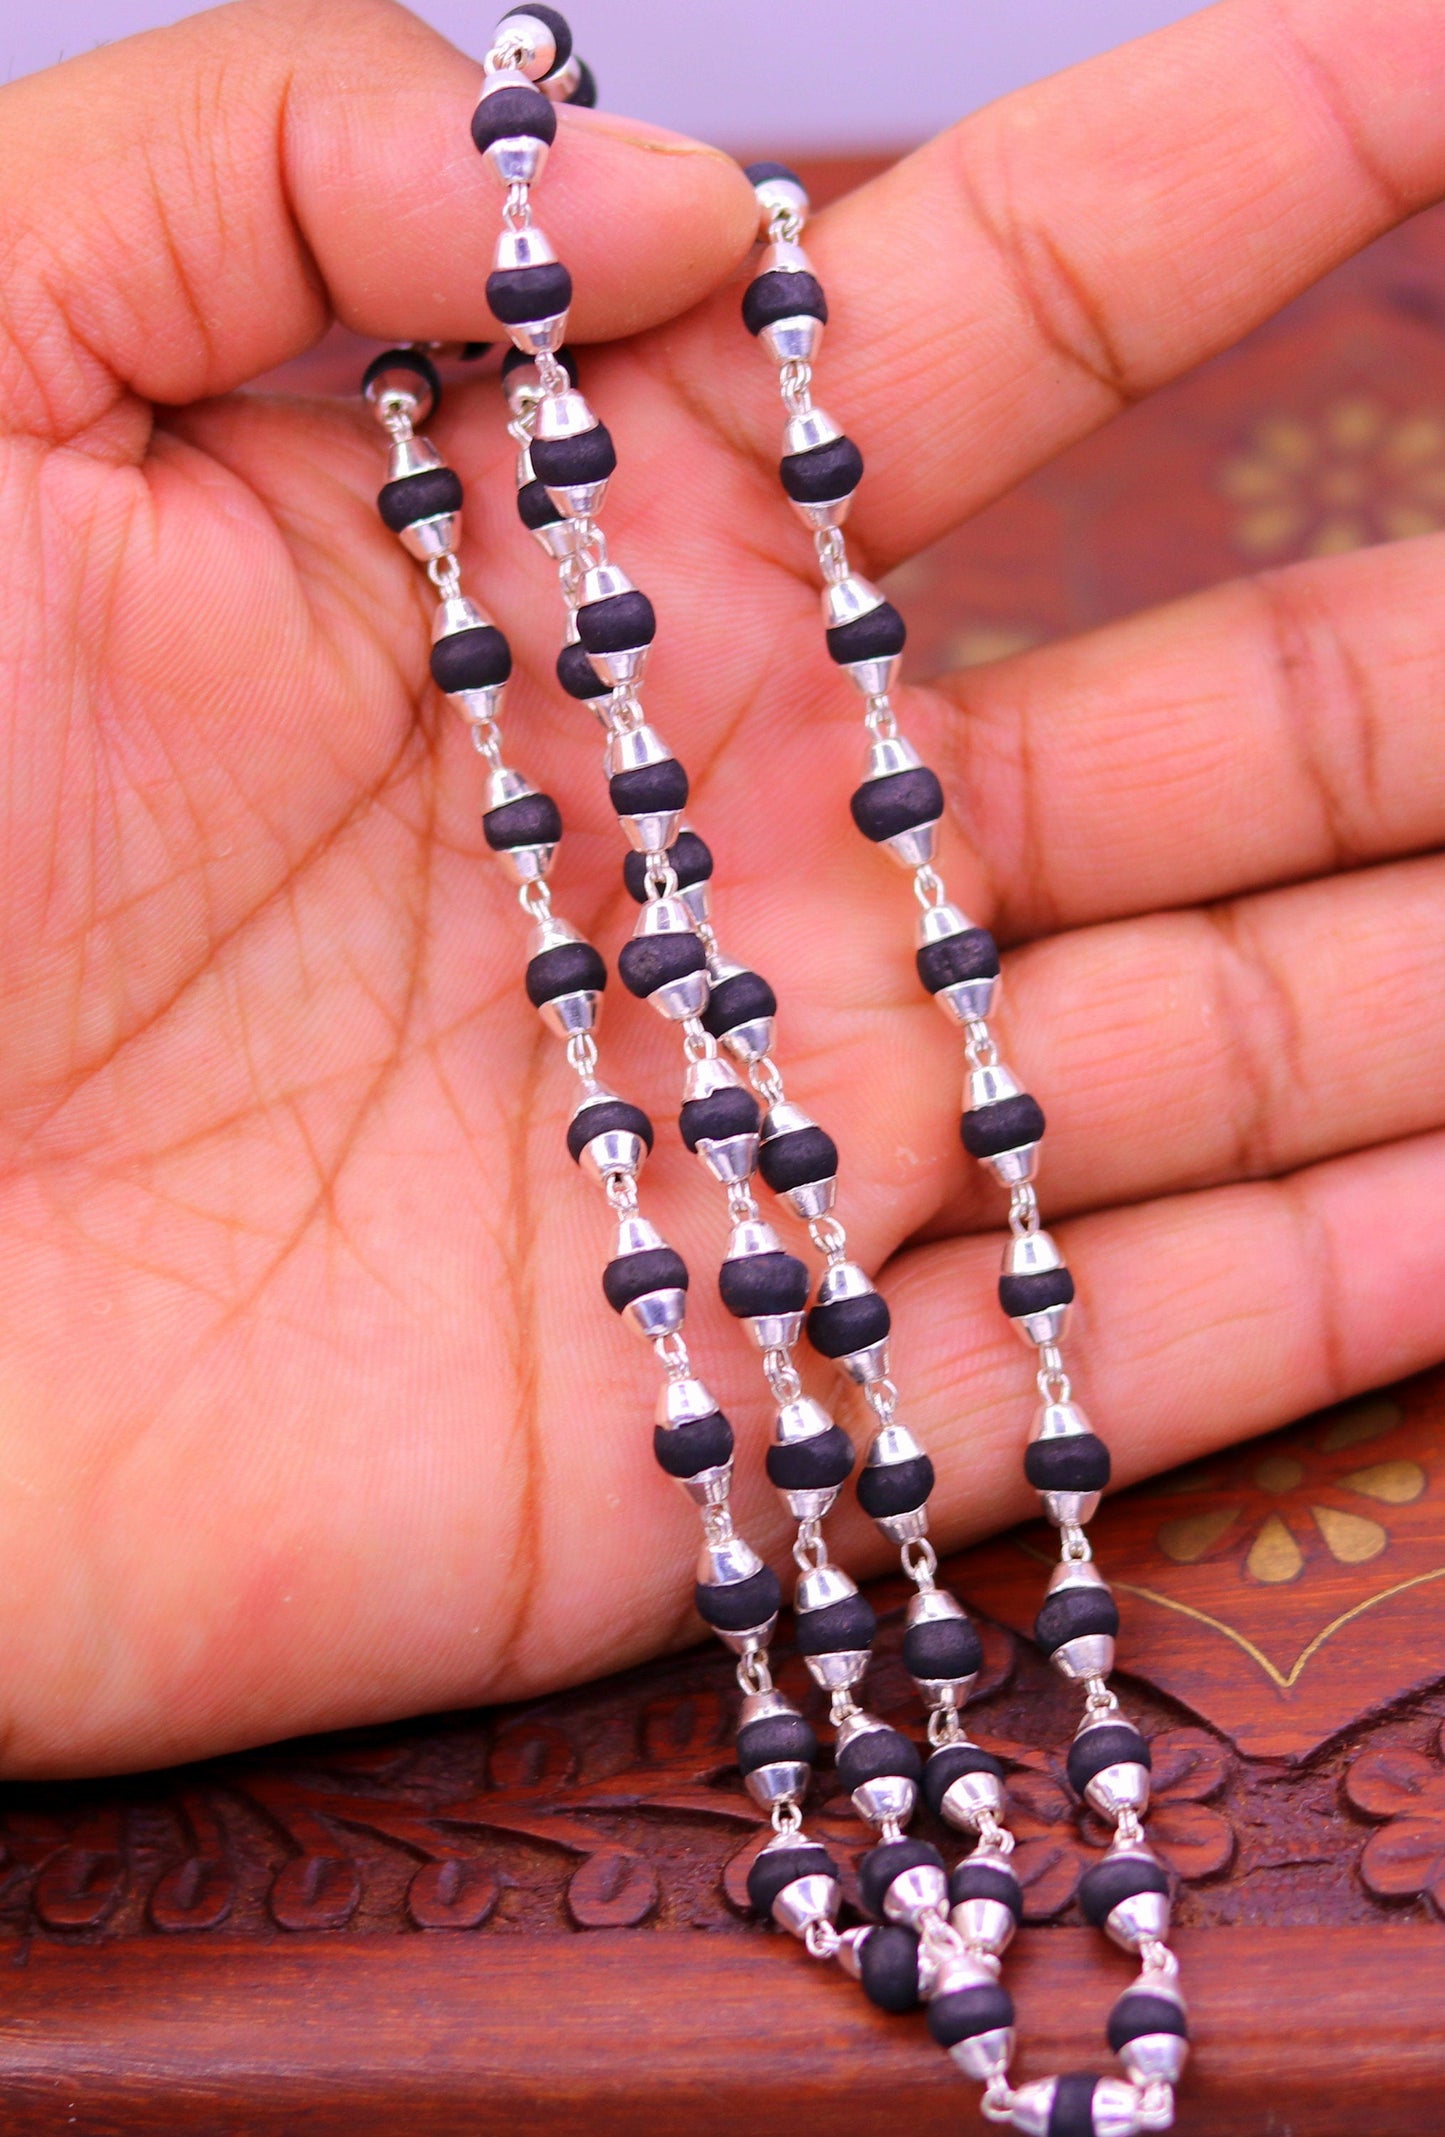 Sterling silver handmade Solid black basil rosary wooden beads silver chain necklace tulsi mala use in Ayurveda meditation ch56 - TRIBAL ORNAMENTS